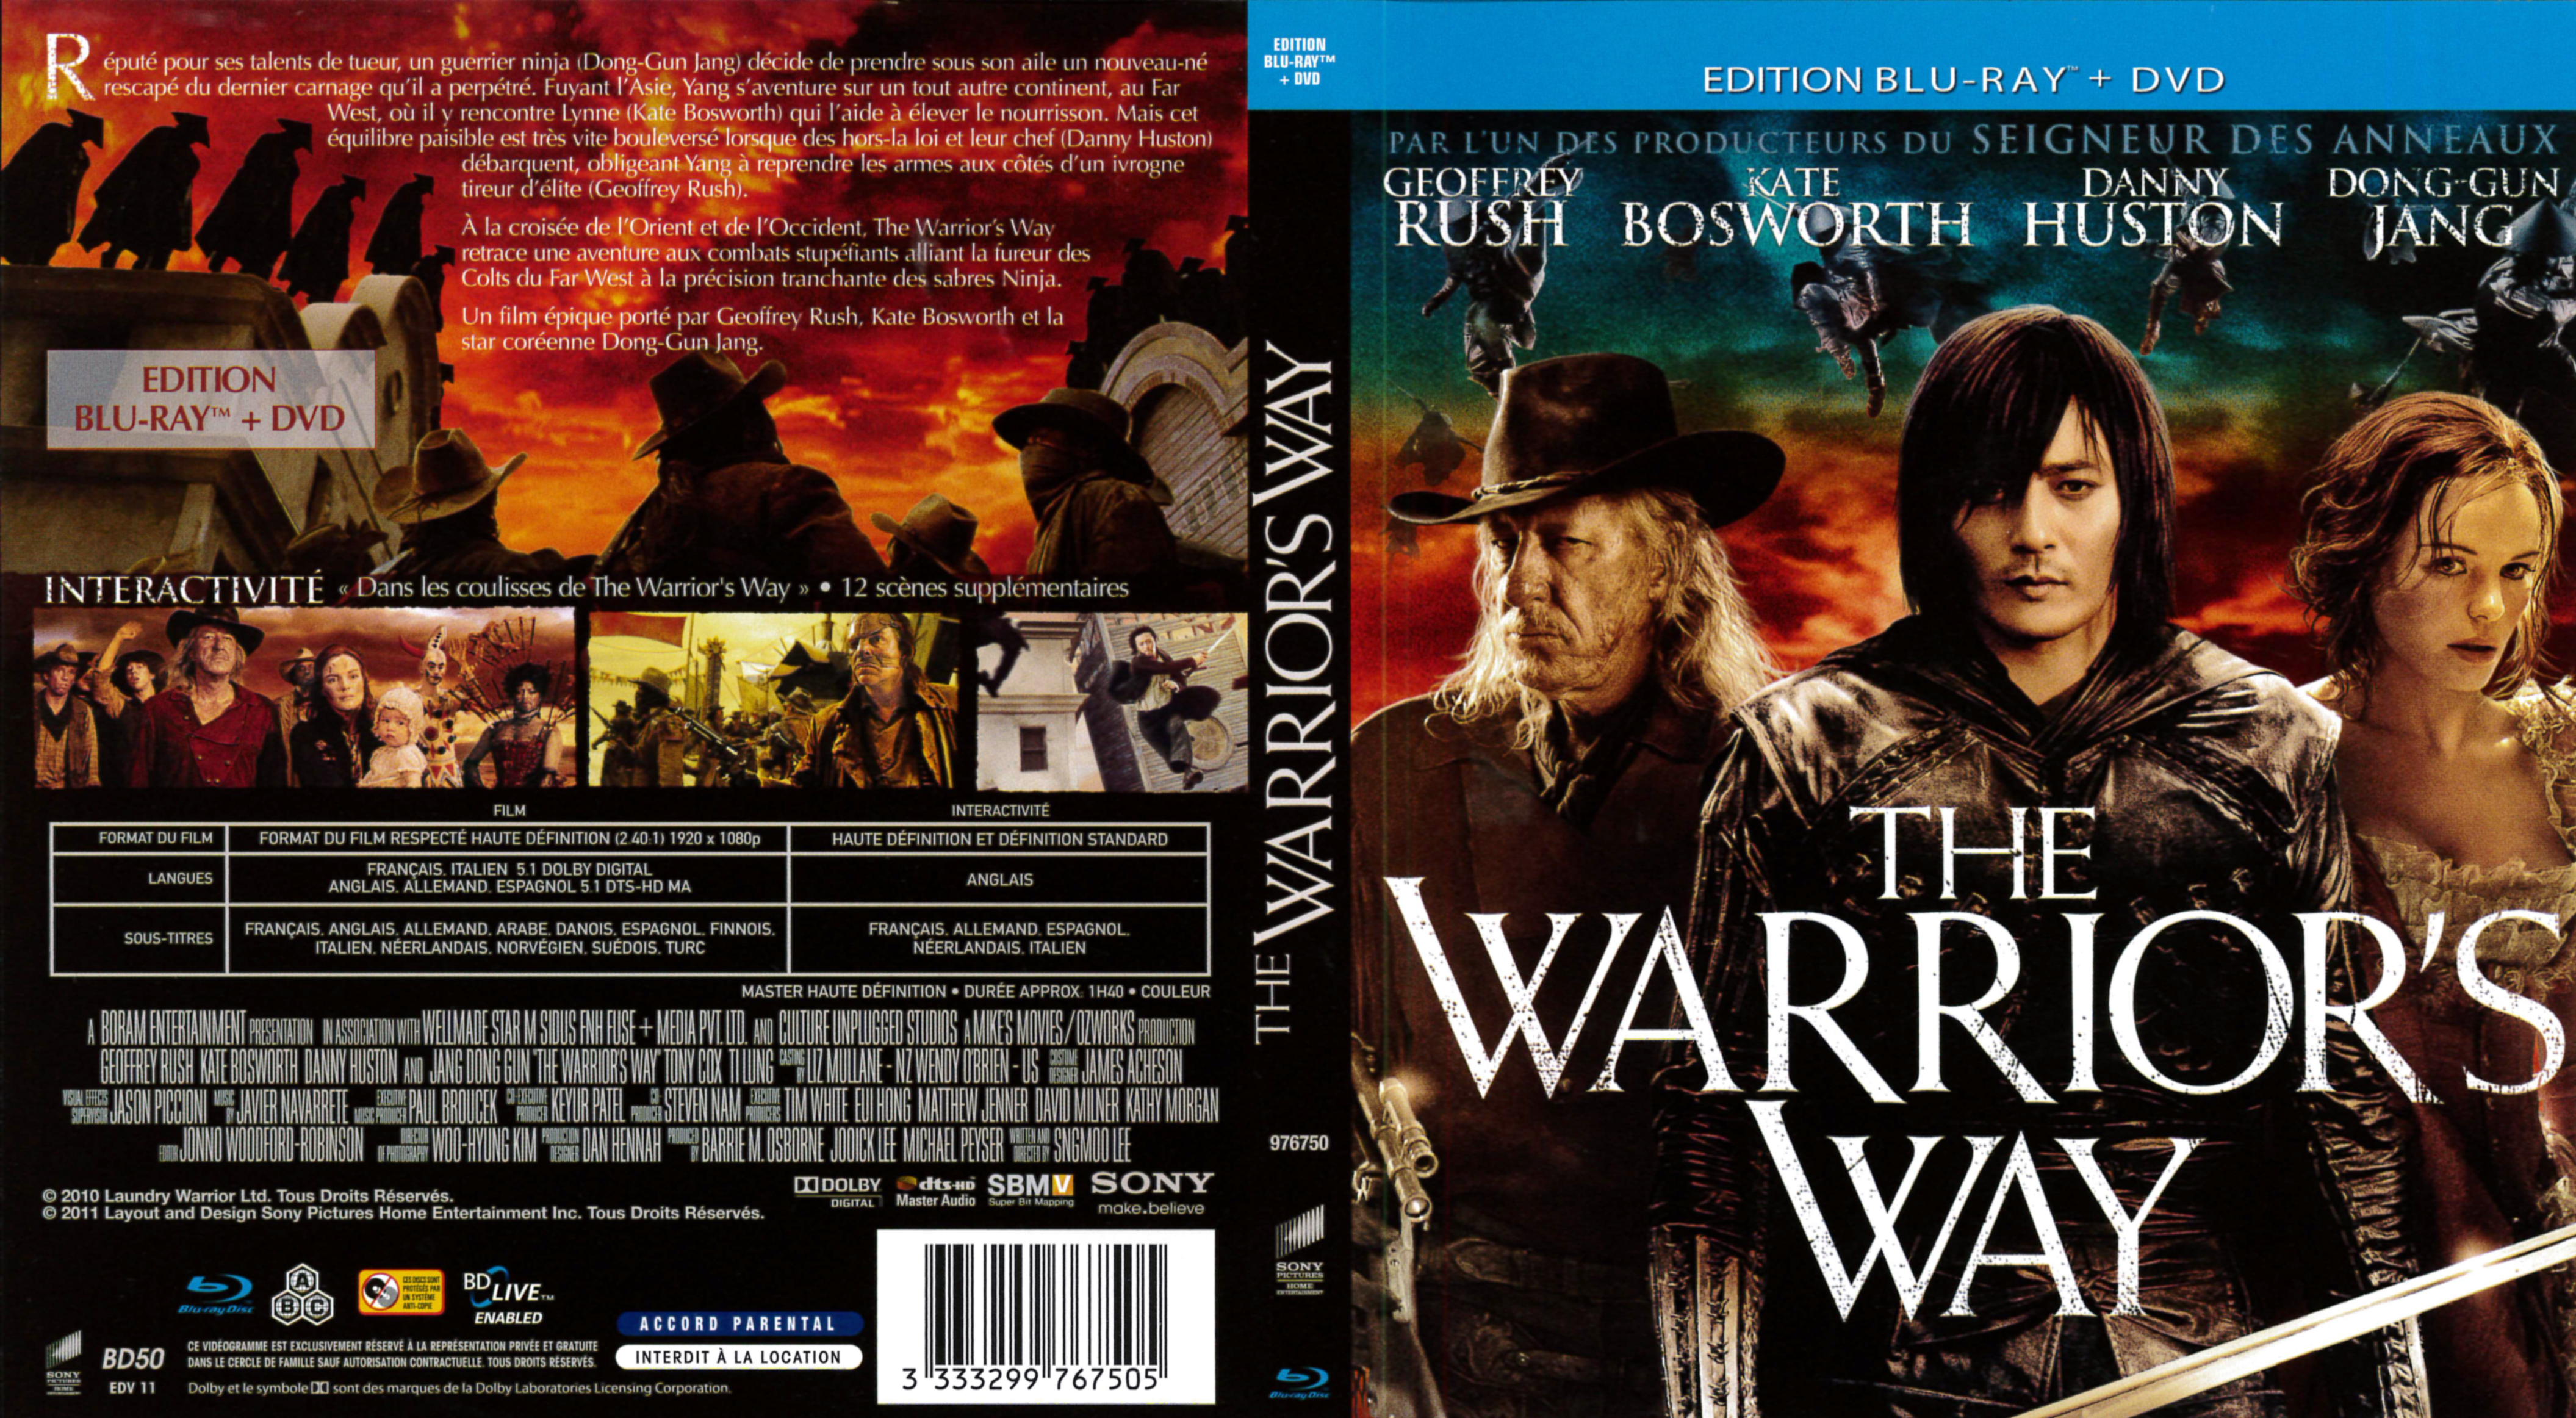 Jaquette DVD The warrior